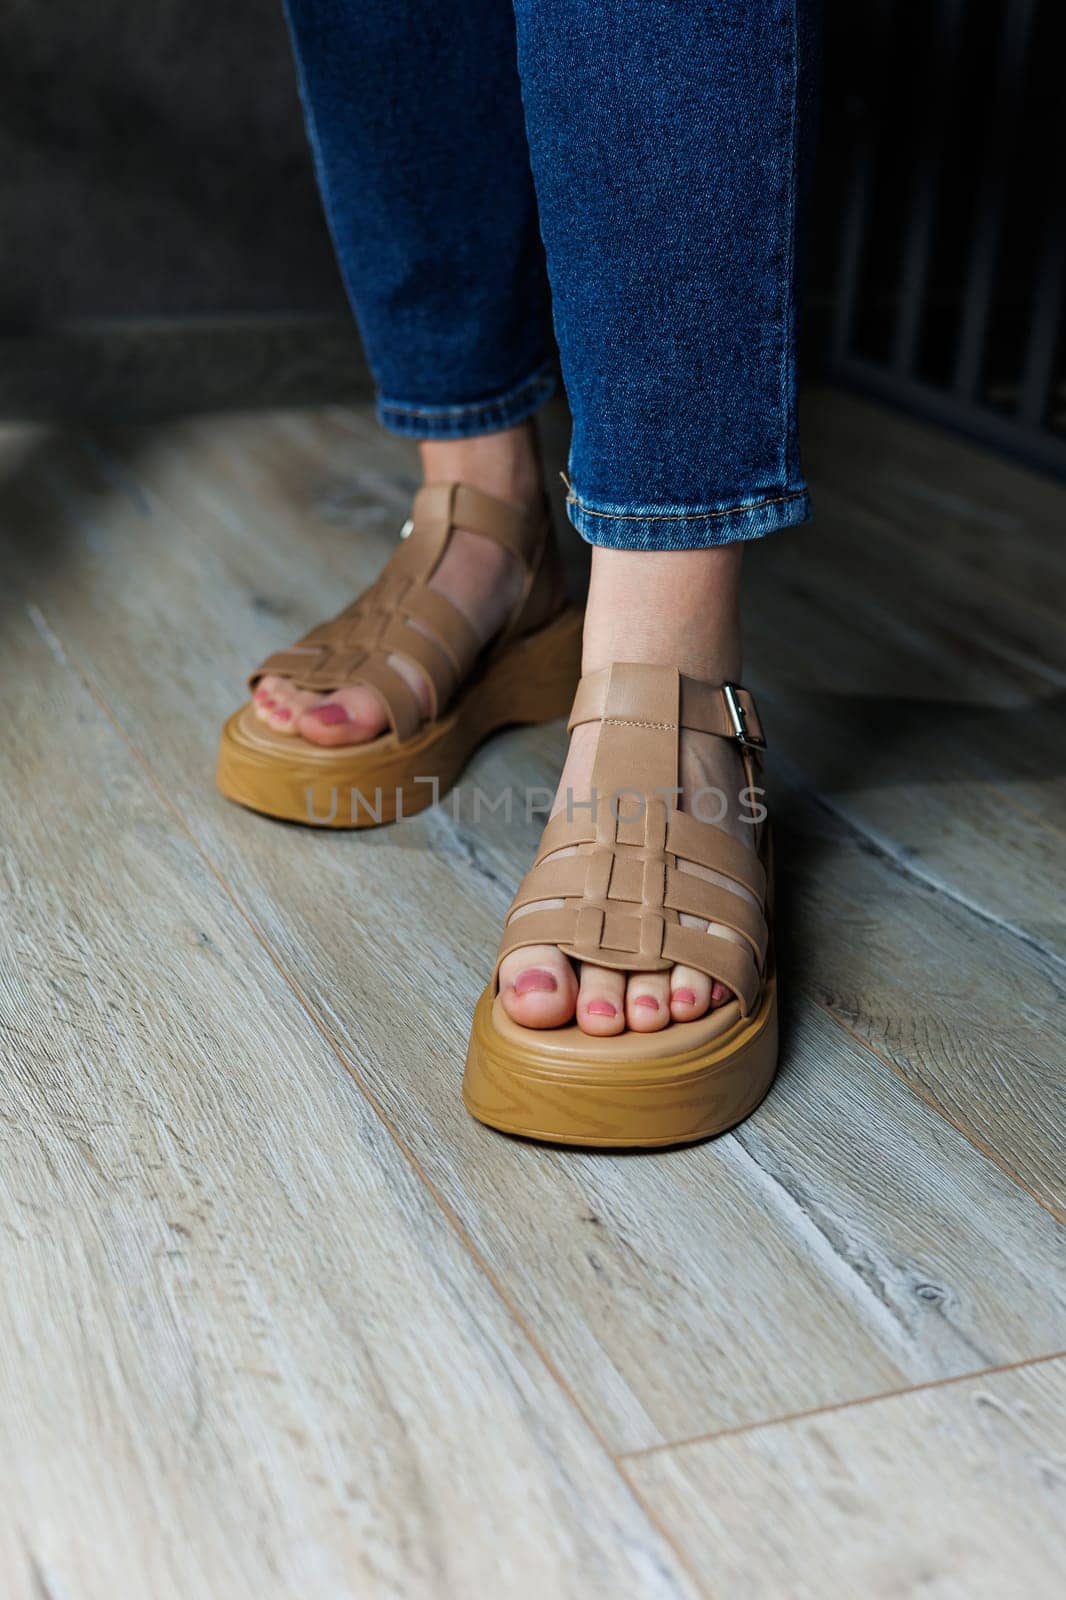 Women's sandals. Female feet close-up in casual brown sandals. Collection of summer women's sandals